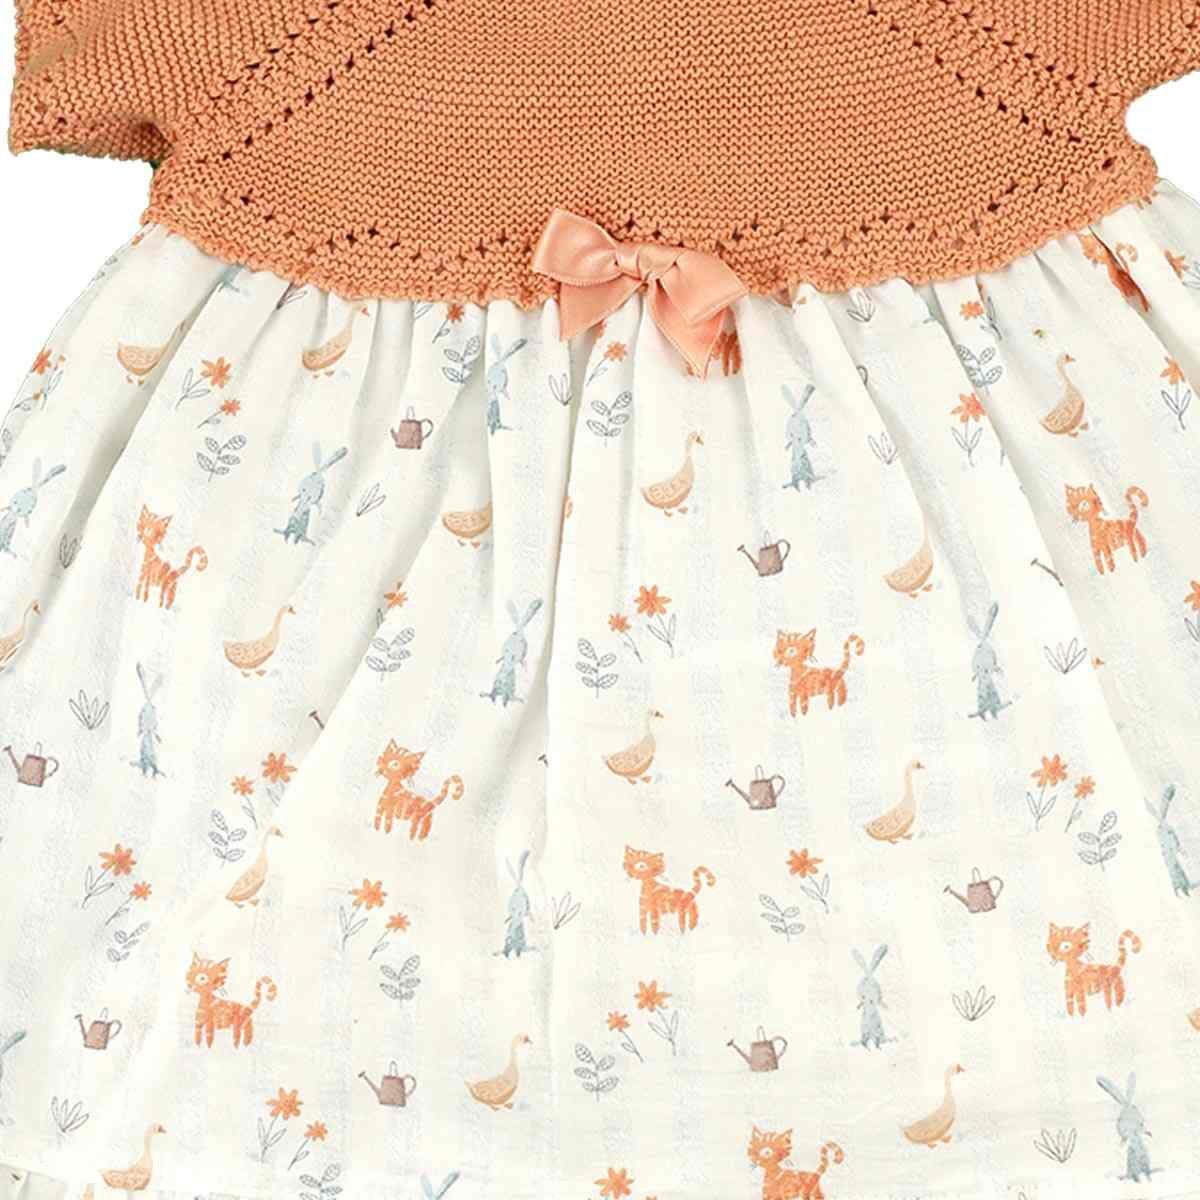 CAT PRINTED COMBINED KNIT DRESS AND BLOOMER DULCE DE FRESA - 1